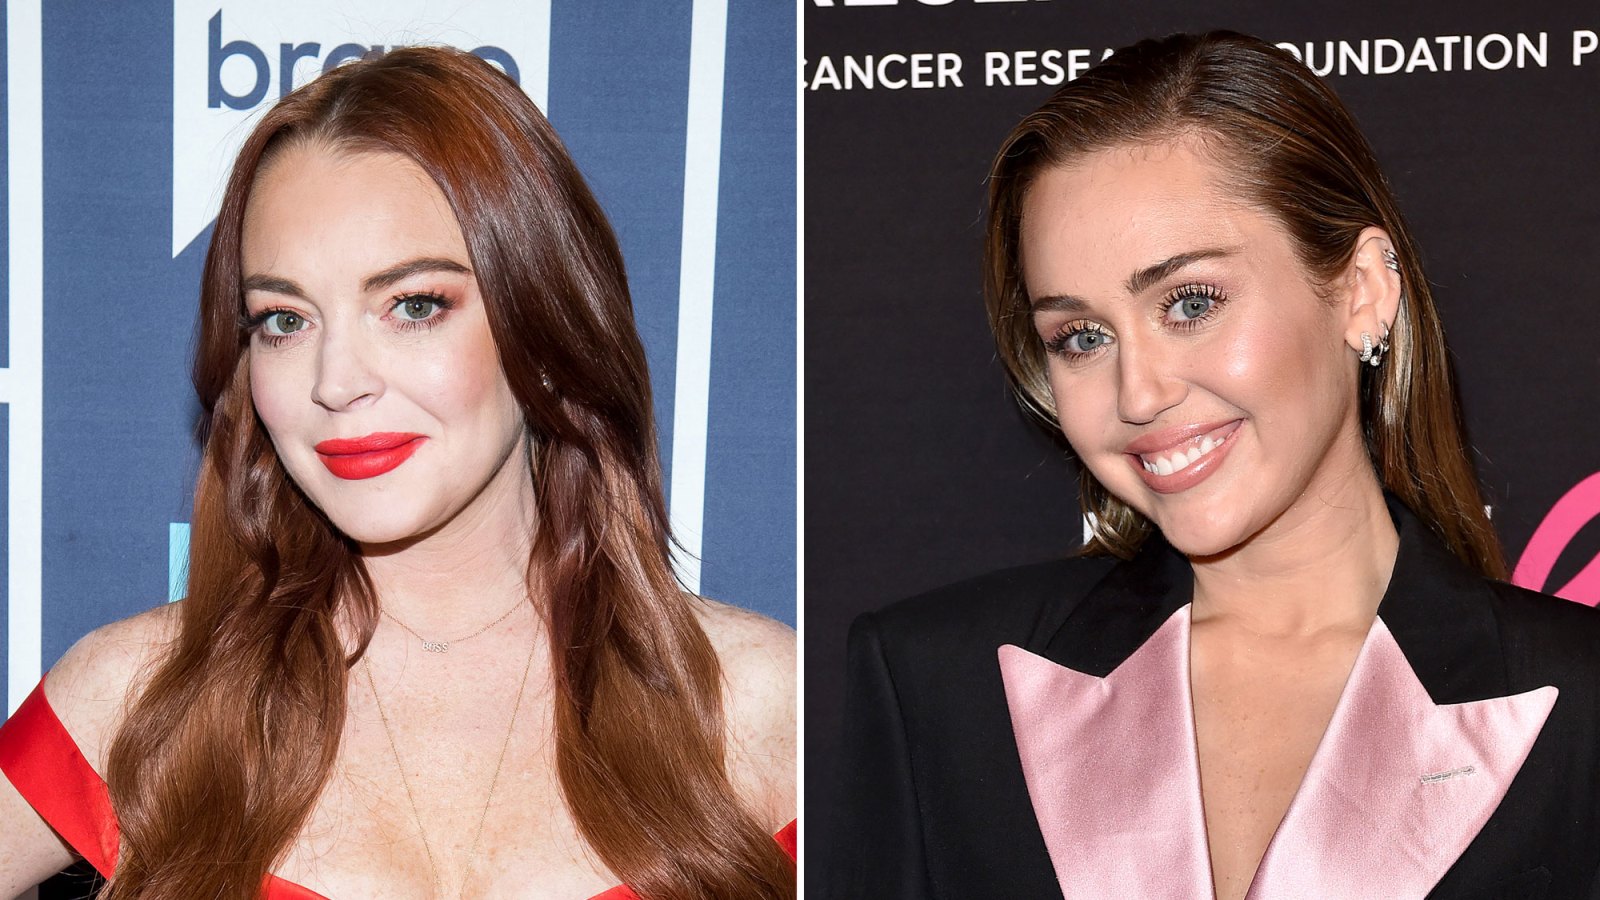 Lindsay Lohan Leaves Silly Comment on Racy Miley Cyrus Photo